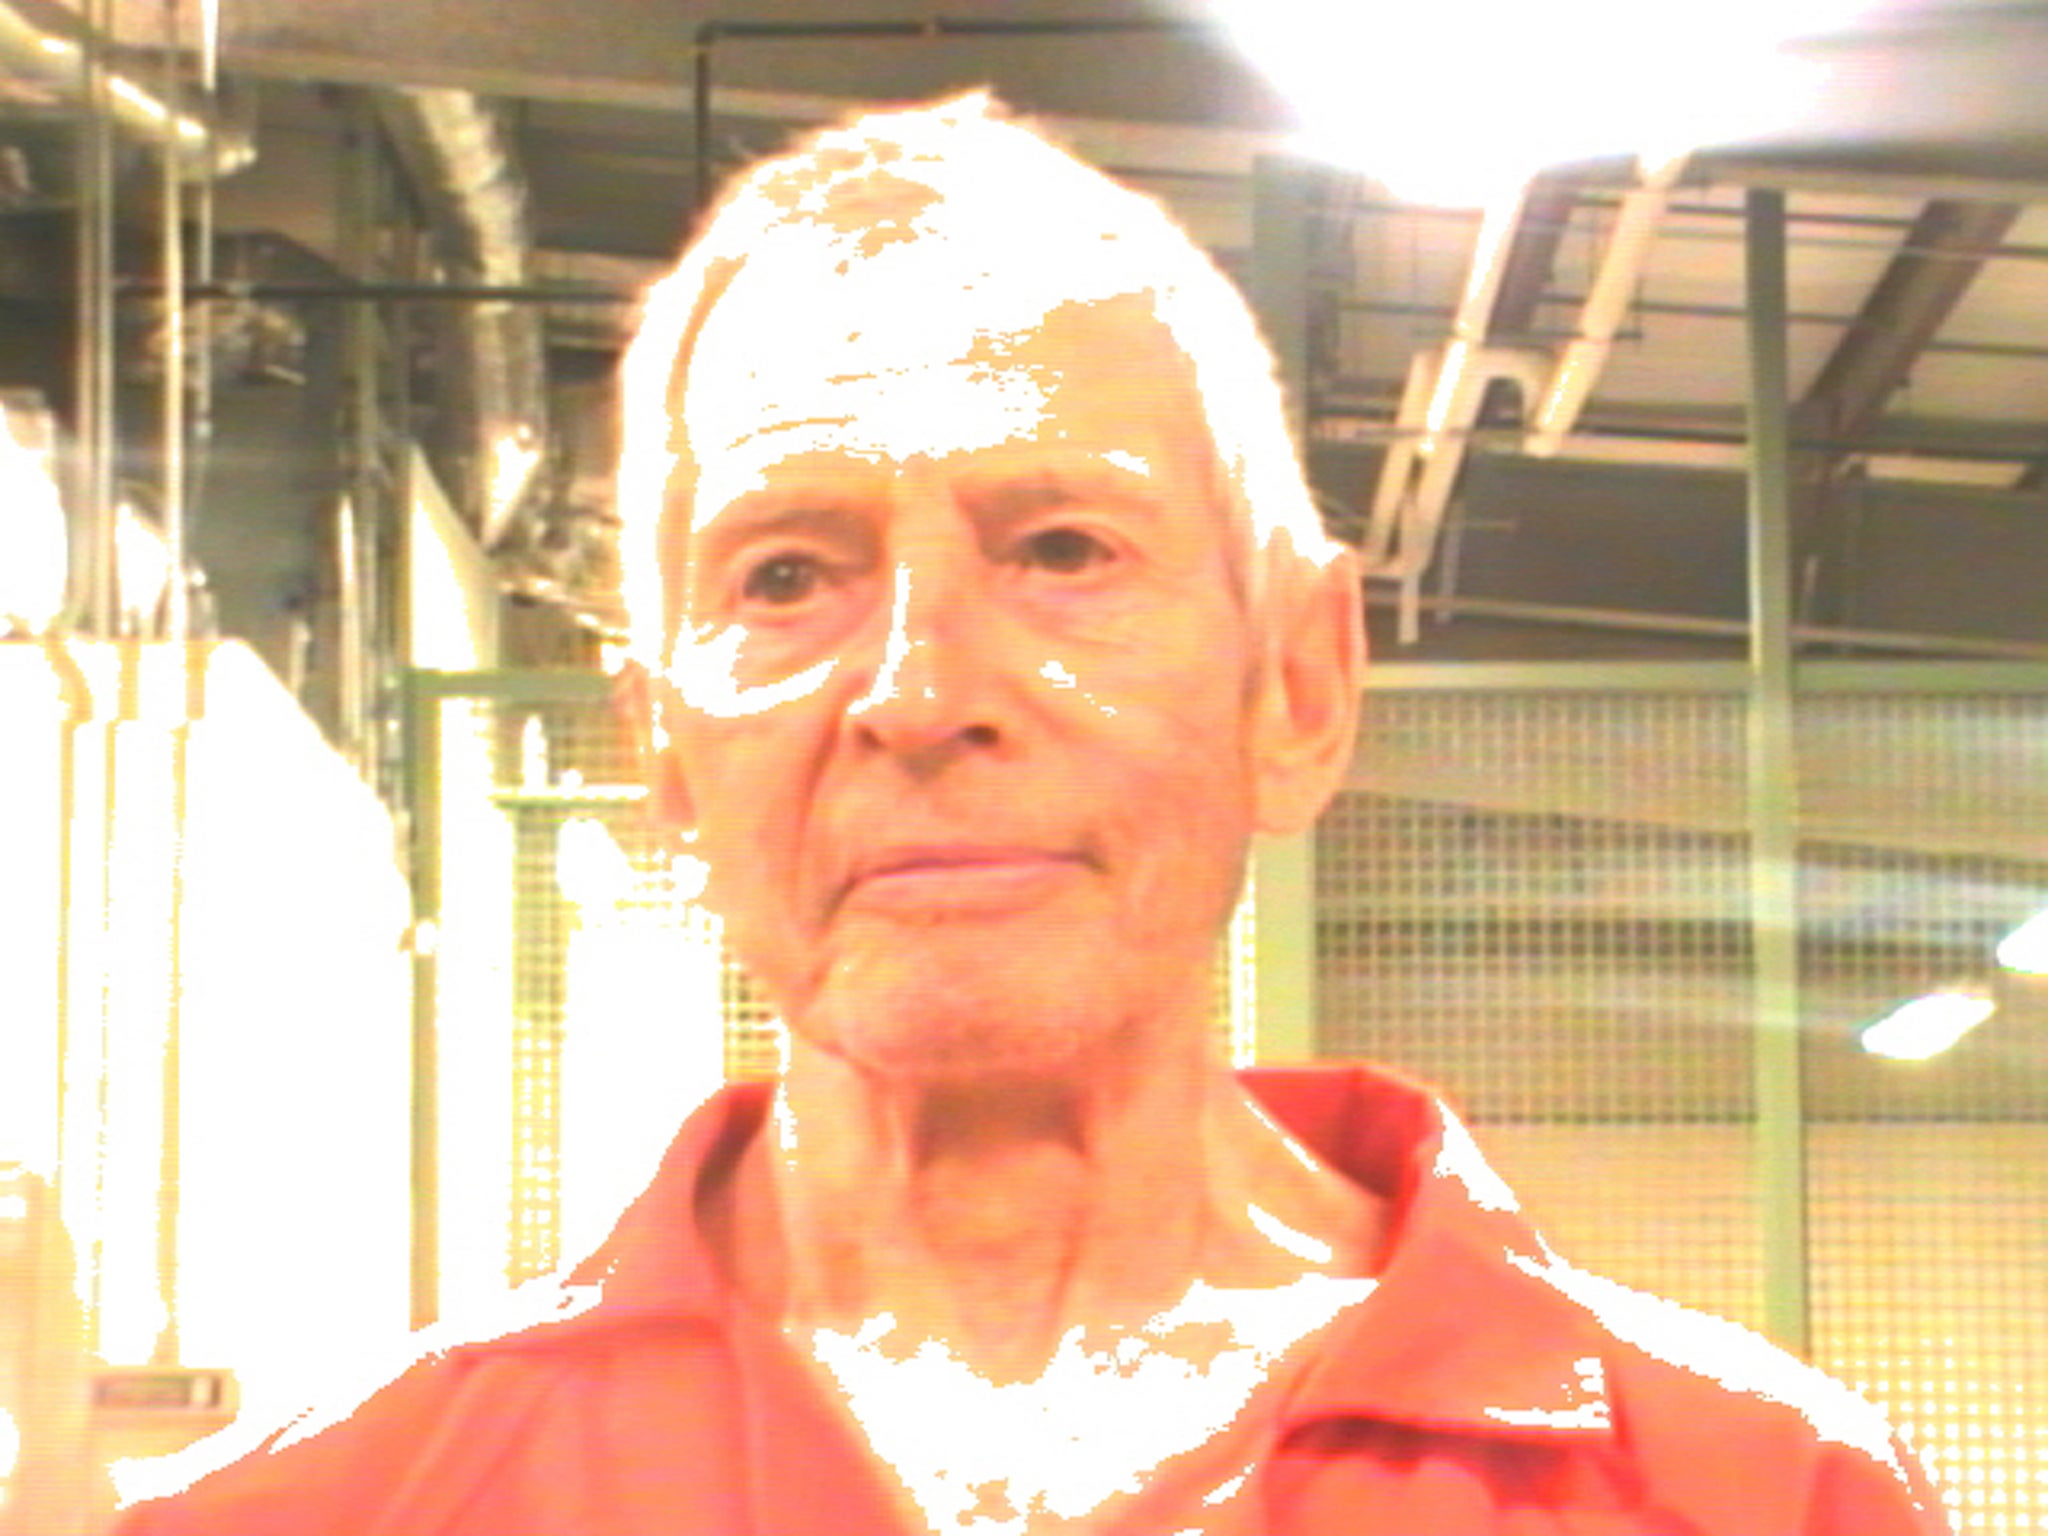 Robert Durst has been arrested in connection with a 2000 murder